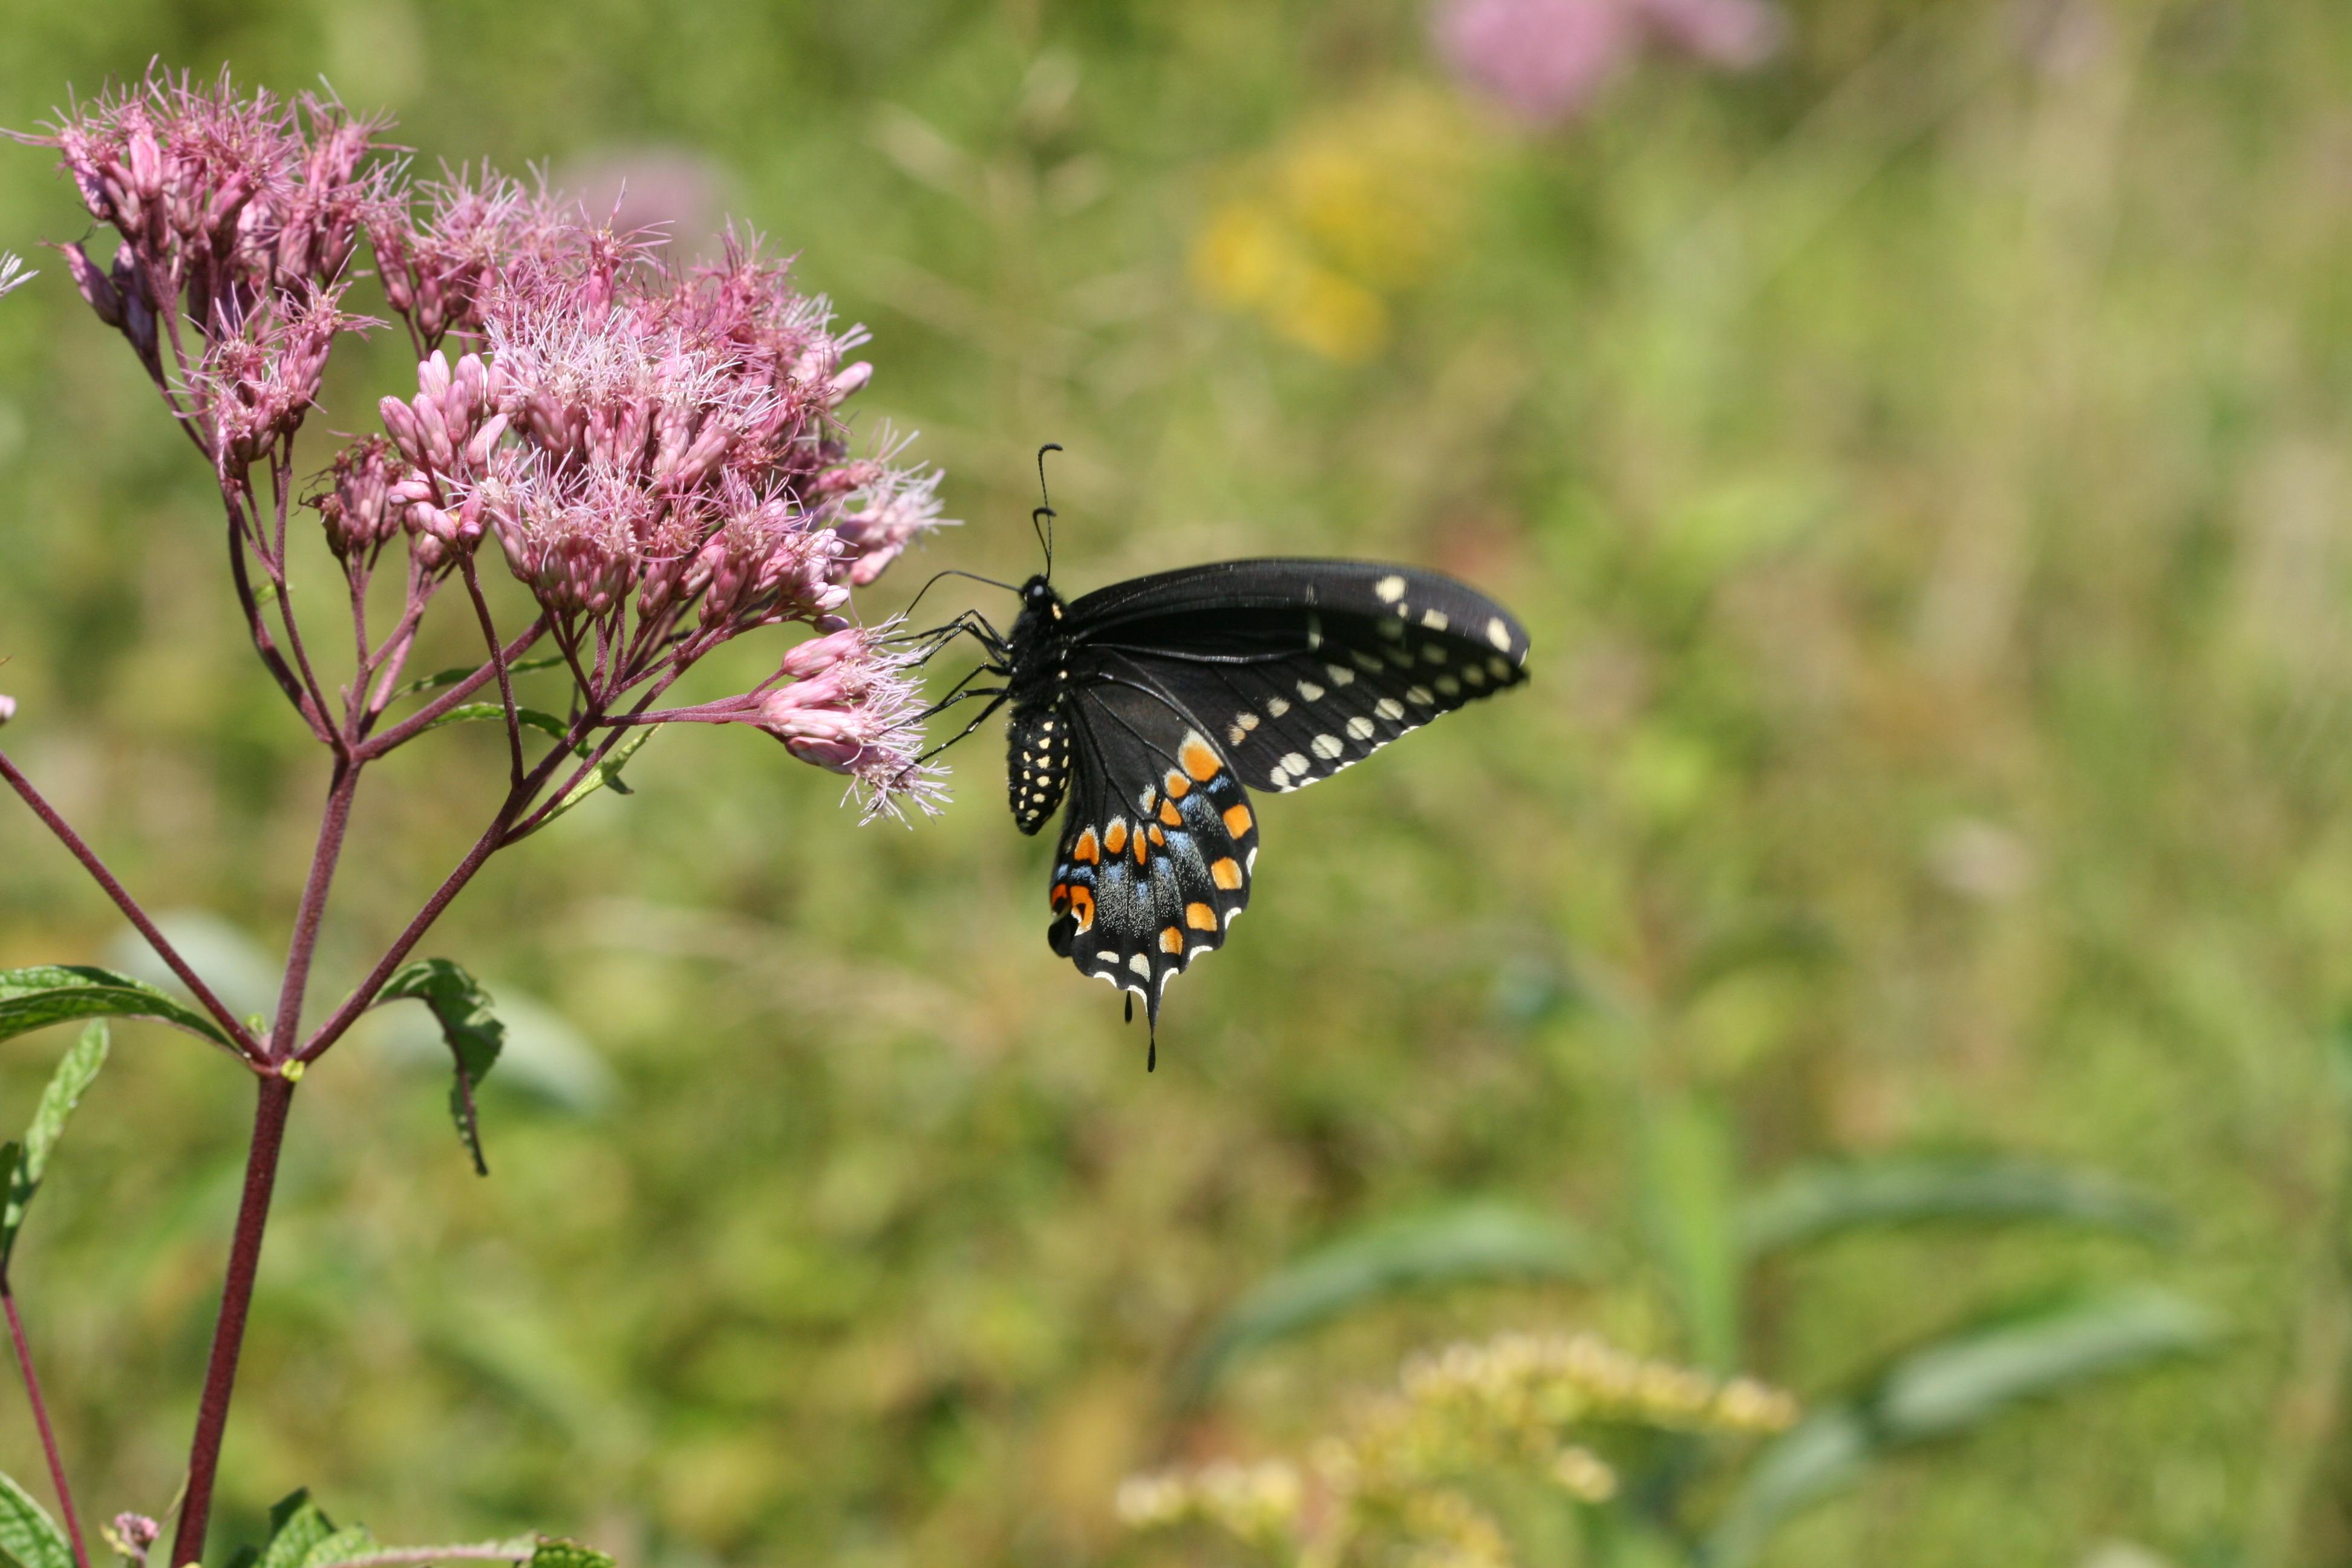 A black swallowtail butterfly perches on a purple flowering plant